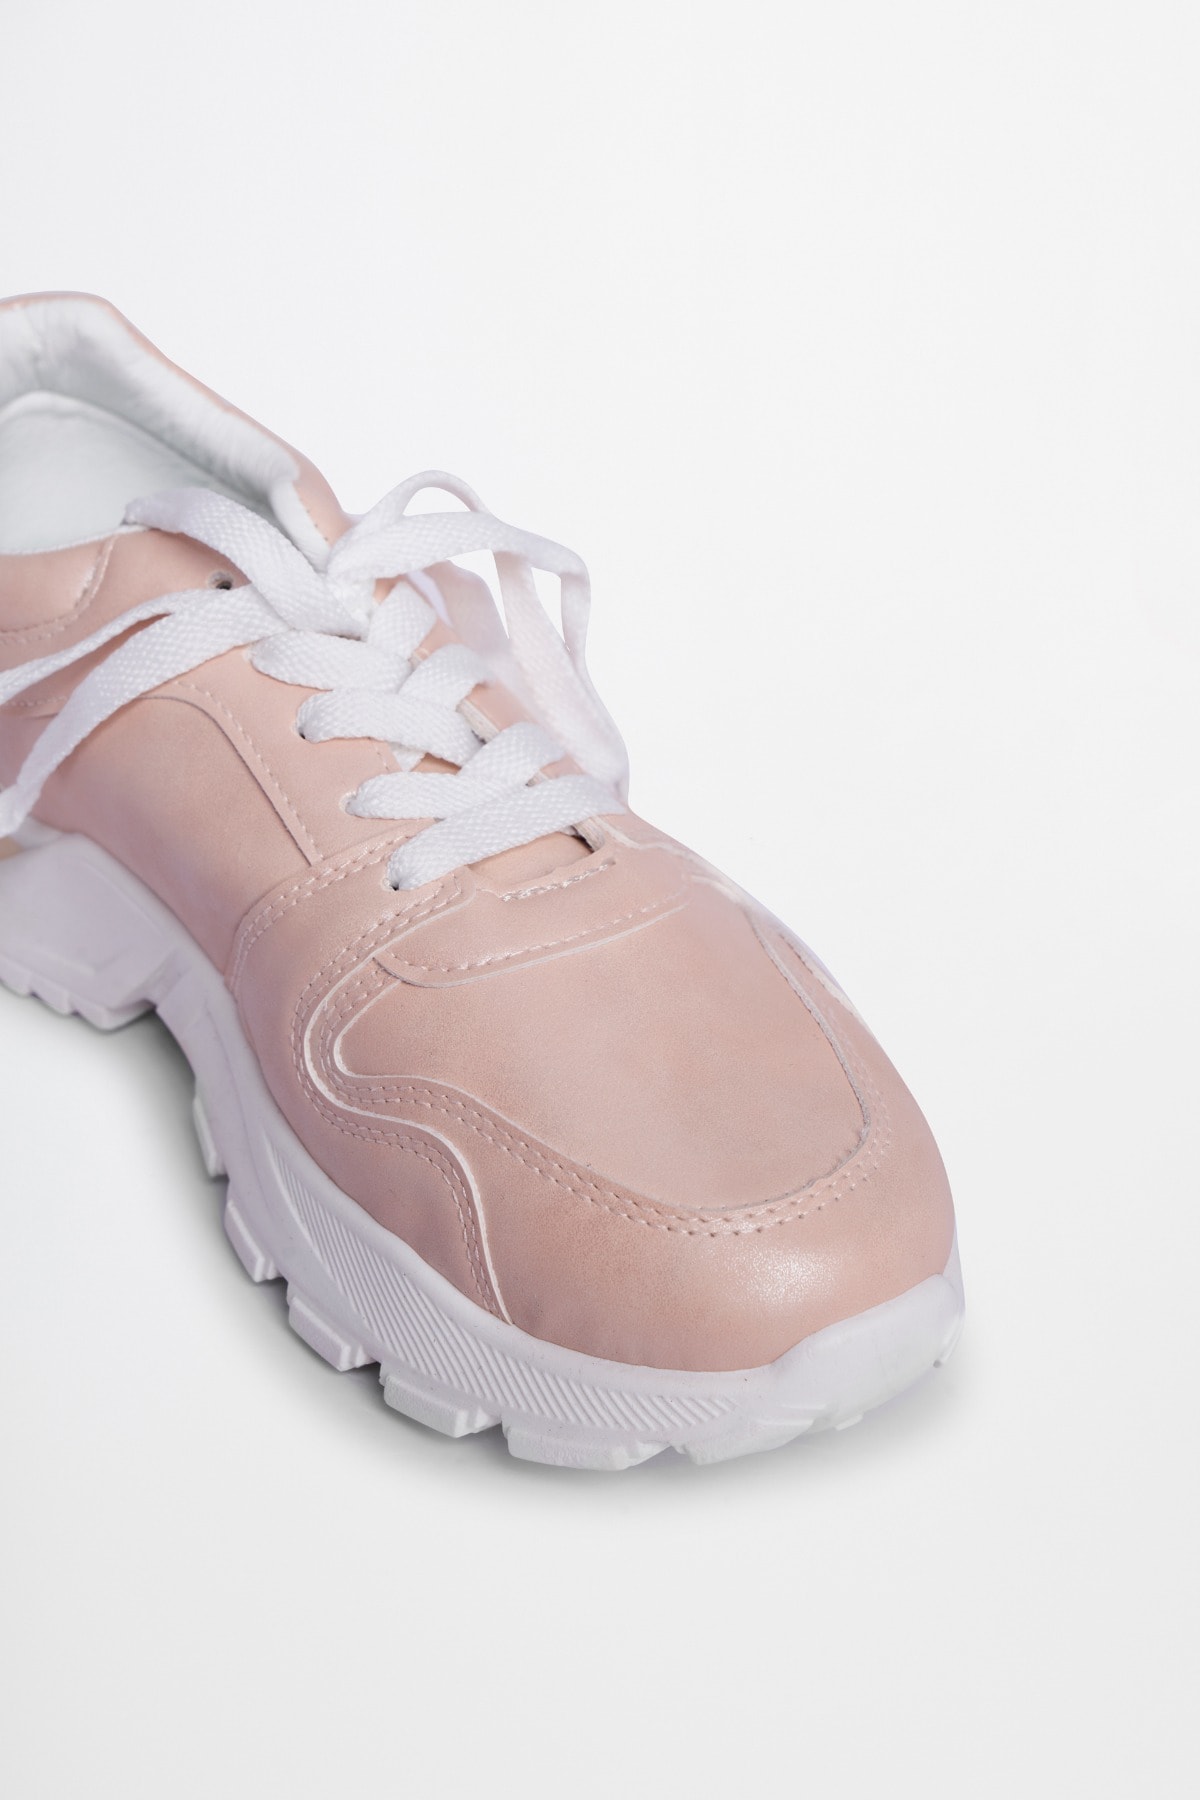 1 - Pink Shoes, image 2